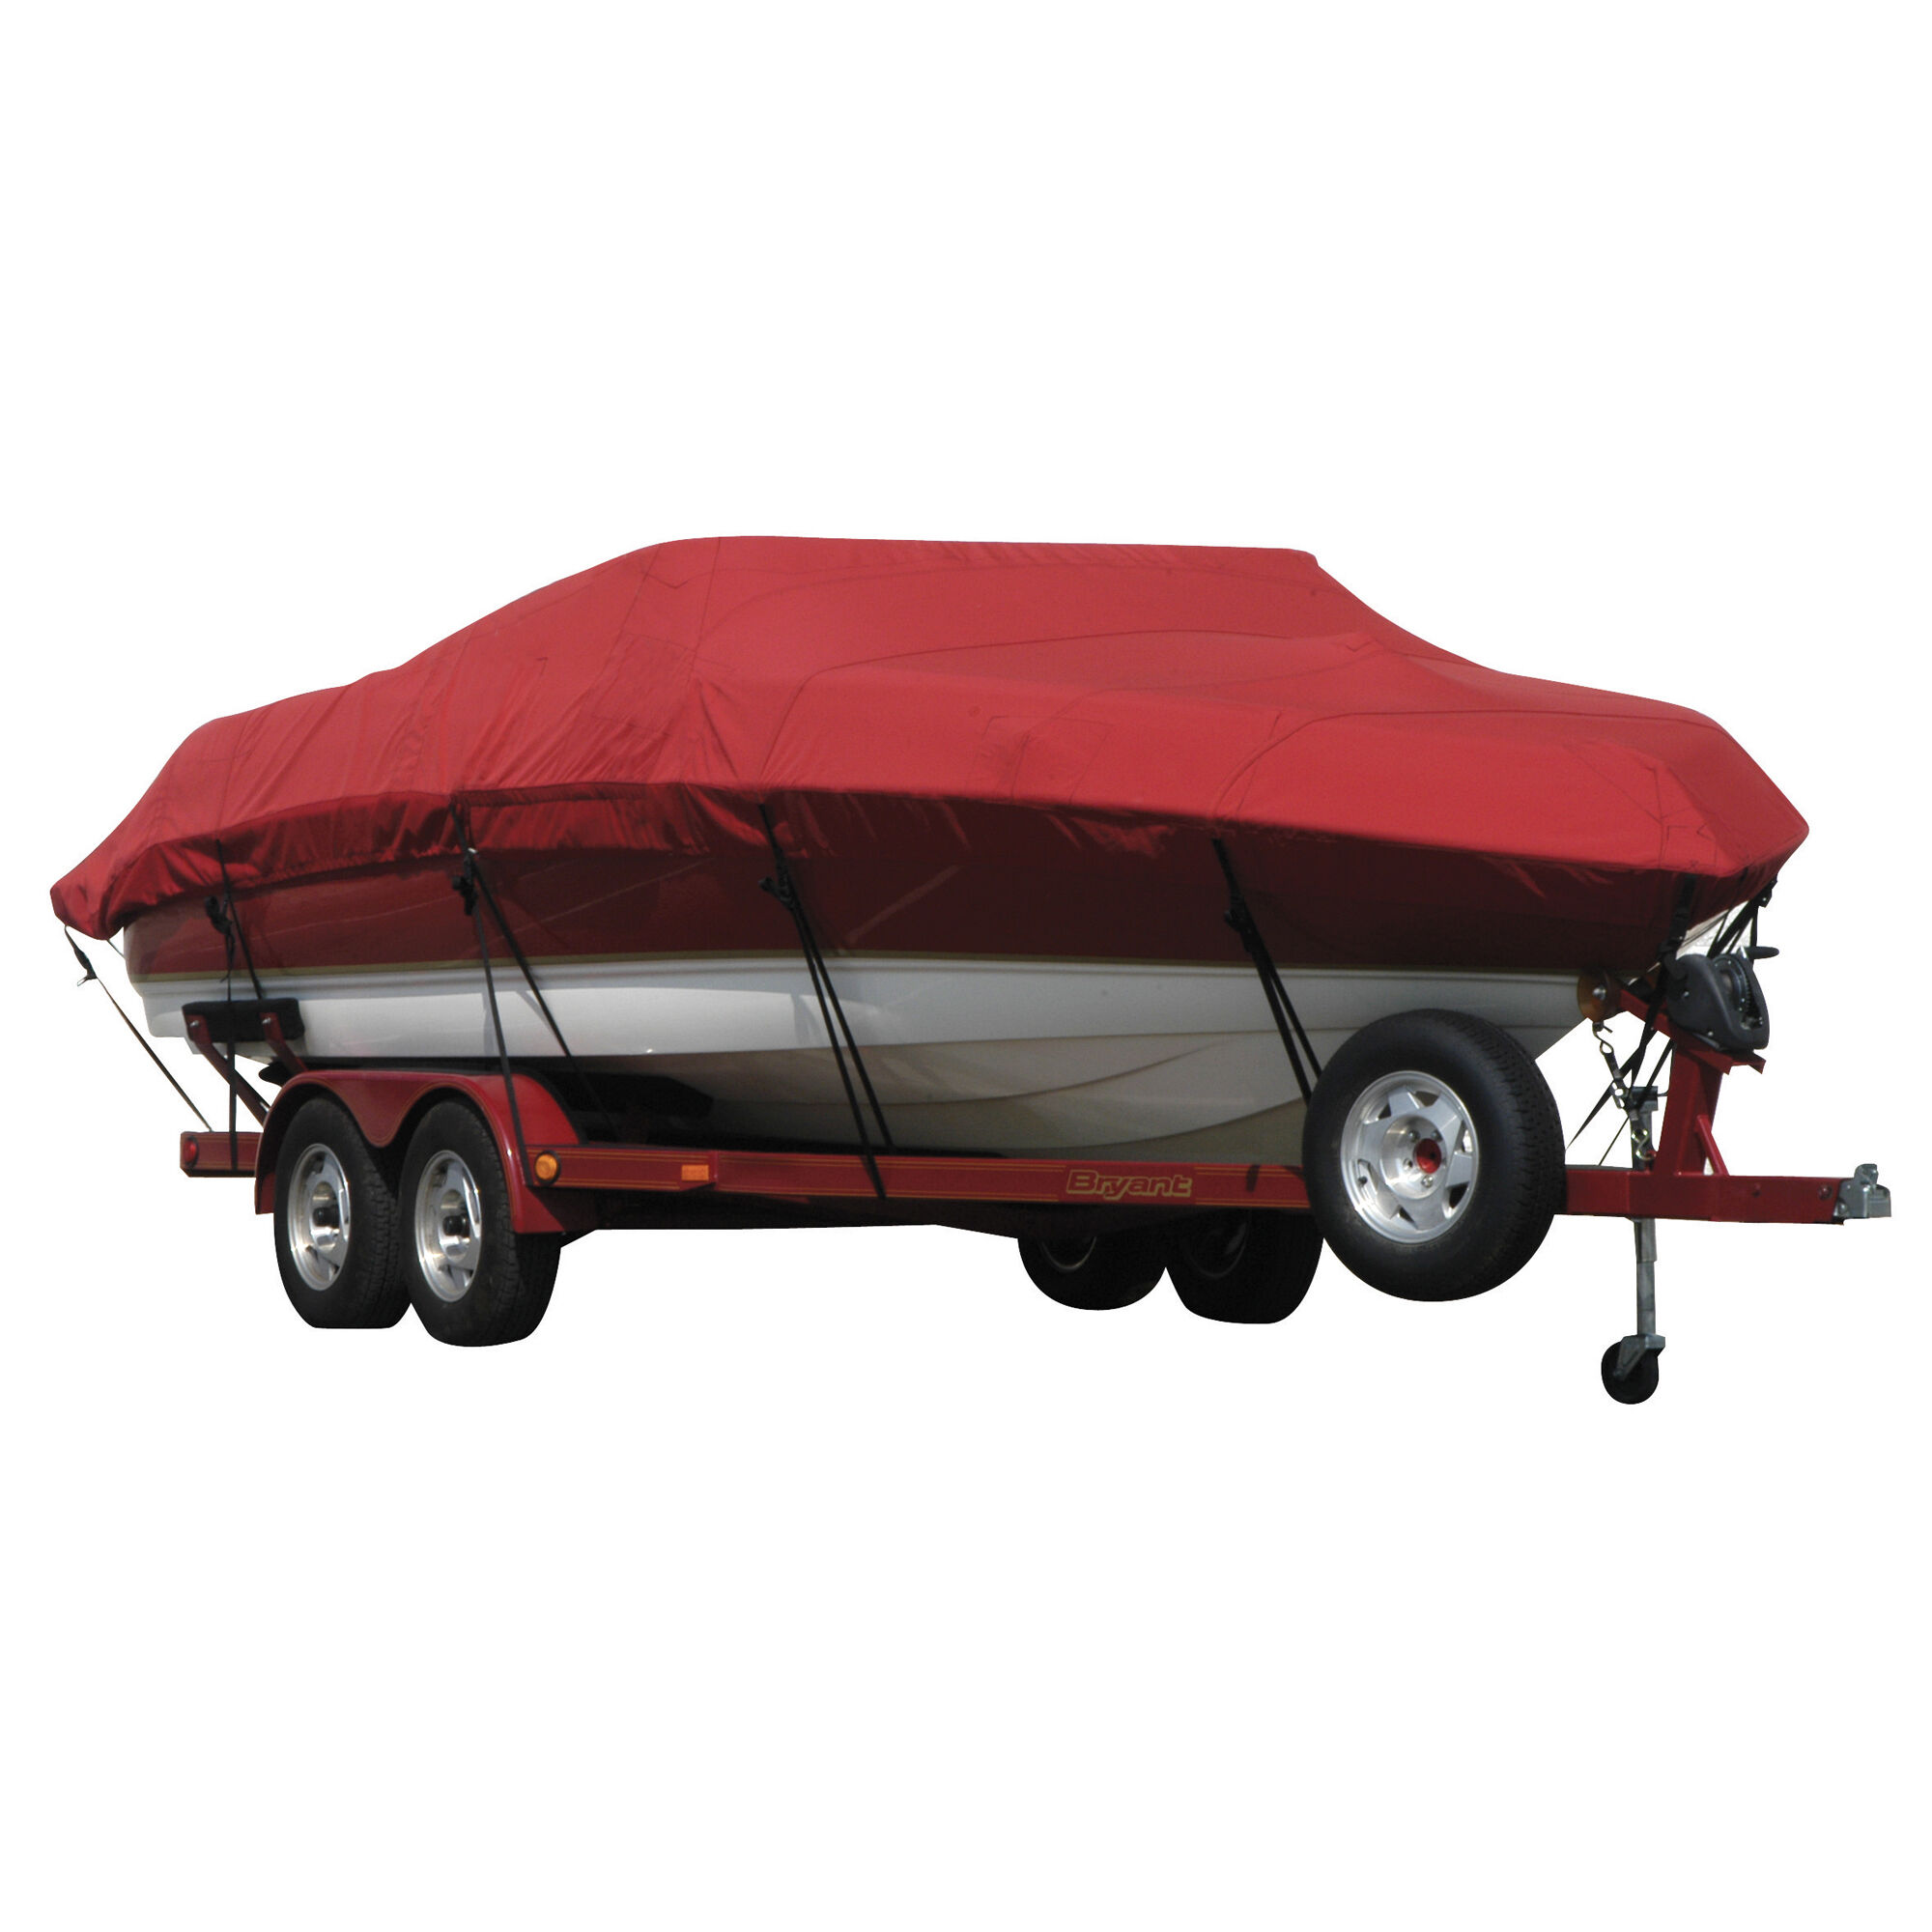 Covermate Exact Fit Sunbrella Boat Cover for Procraft 180 180 Side Console w/ Shield w/ Port Trolling Motor O/B. Red